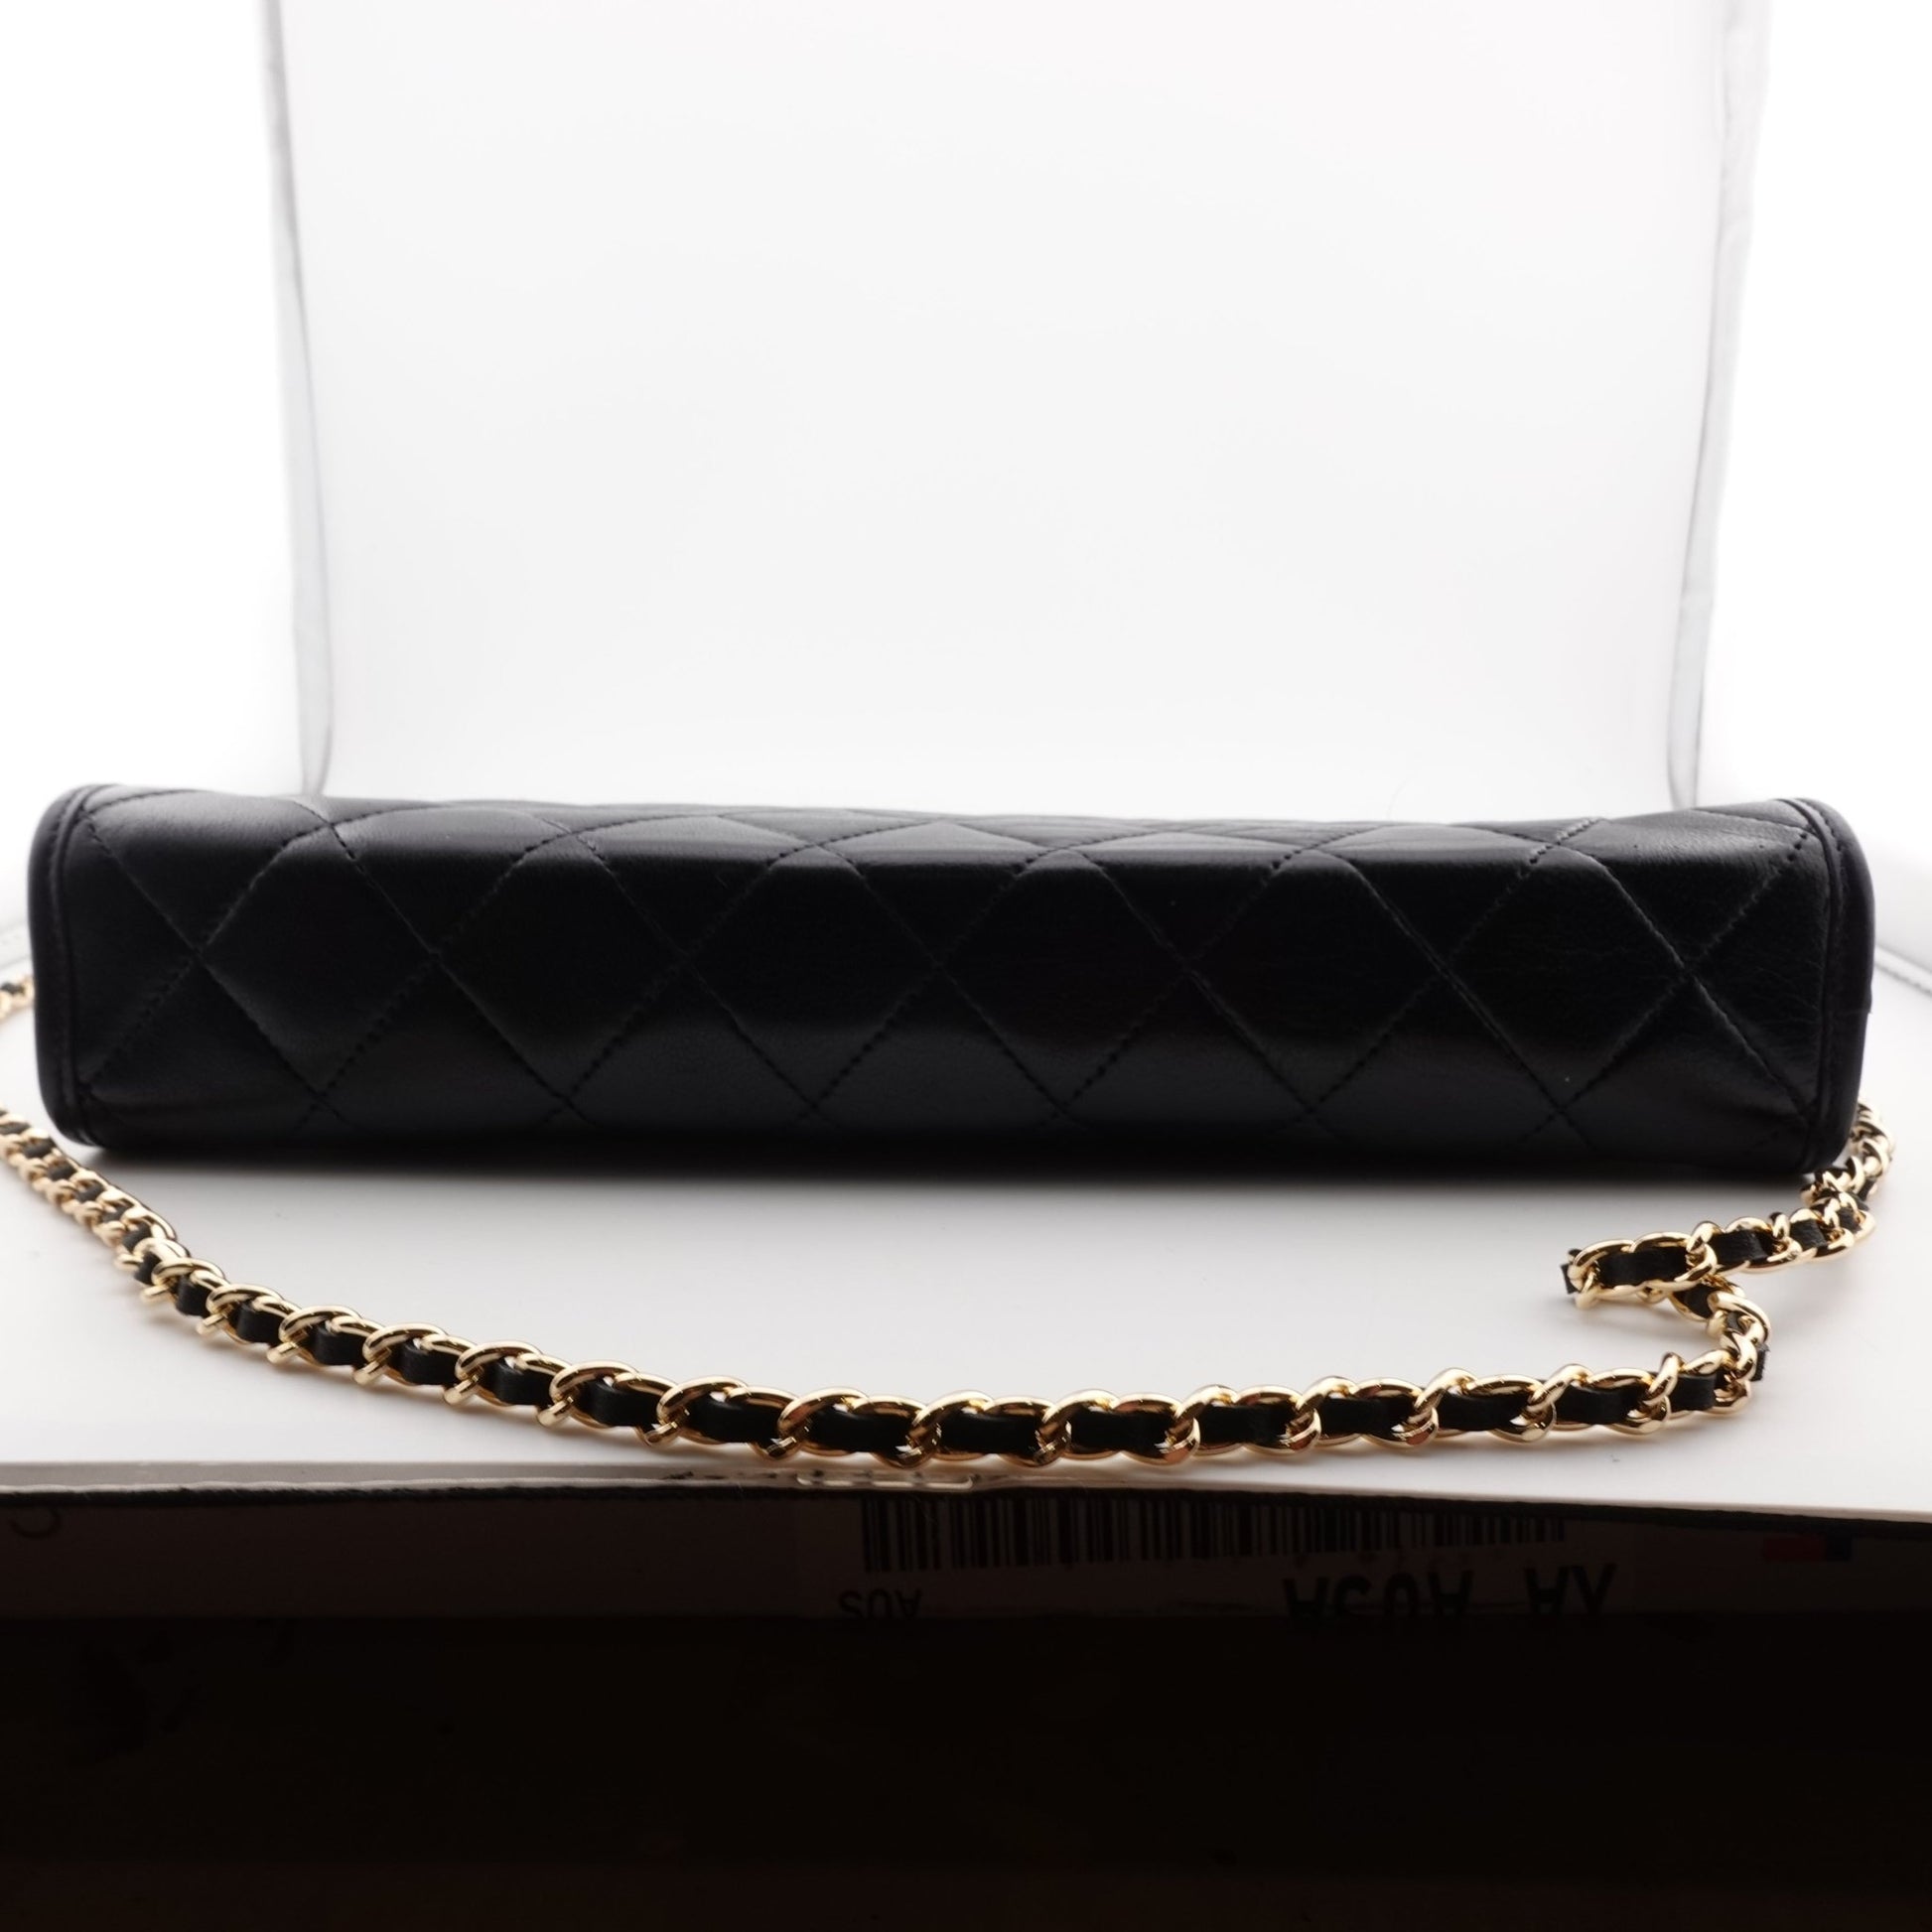 CHANEL Lambskin French Frame Clutch with Chain - Bag Envy